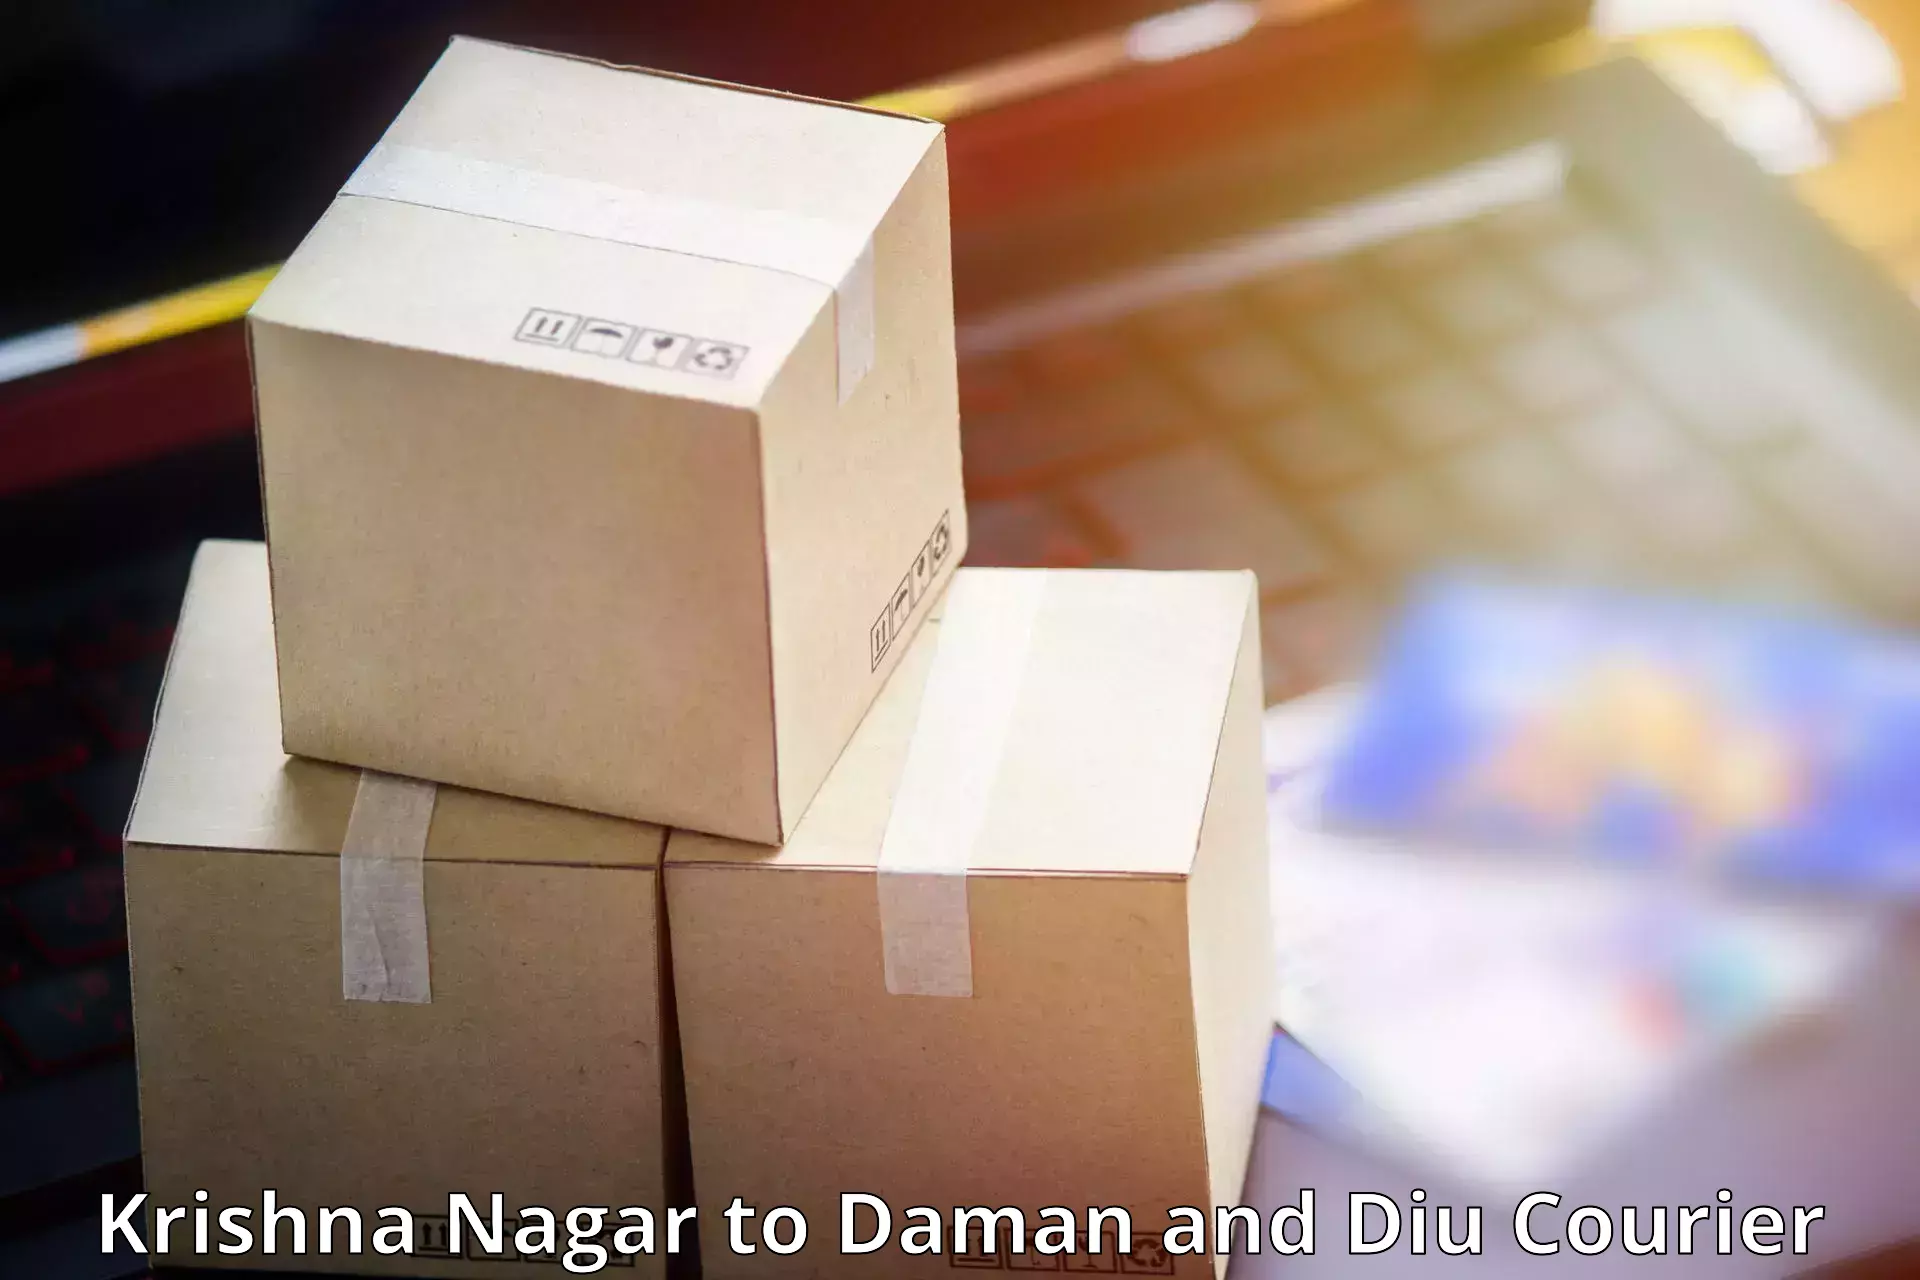 State-of-the-art courier technology Krishna Nagar to Daman and Diu